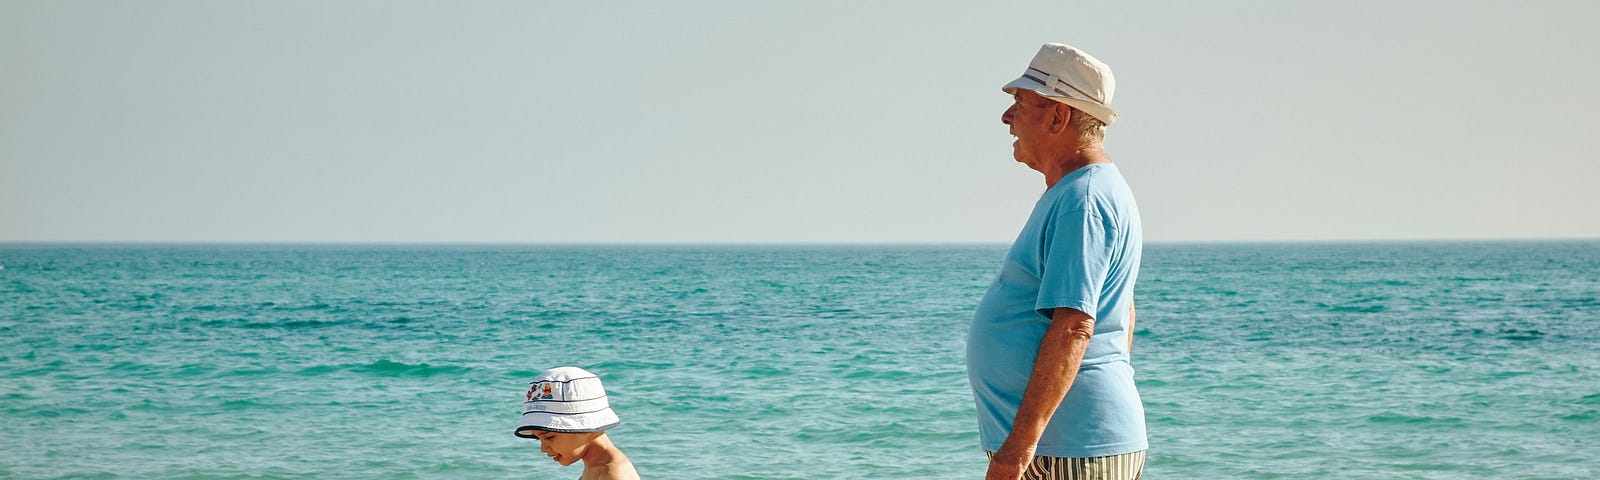 Walking along the beach, with the water in the background, a young child and, presumably, his grandfather. Both are wearing the same kind of sun hat.